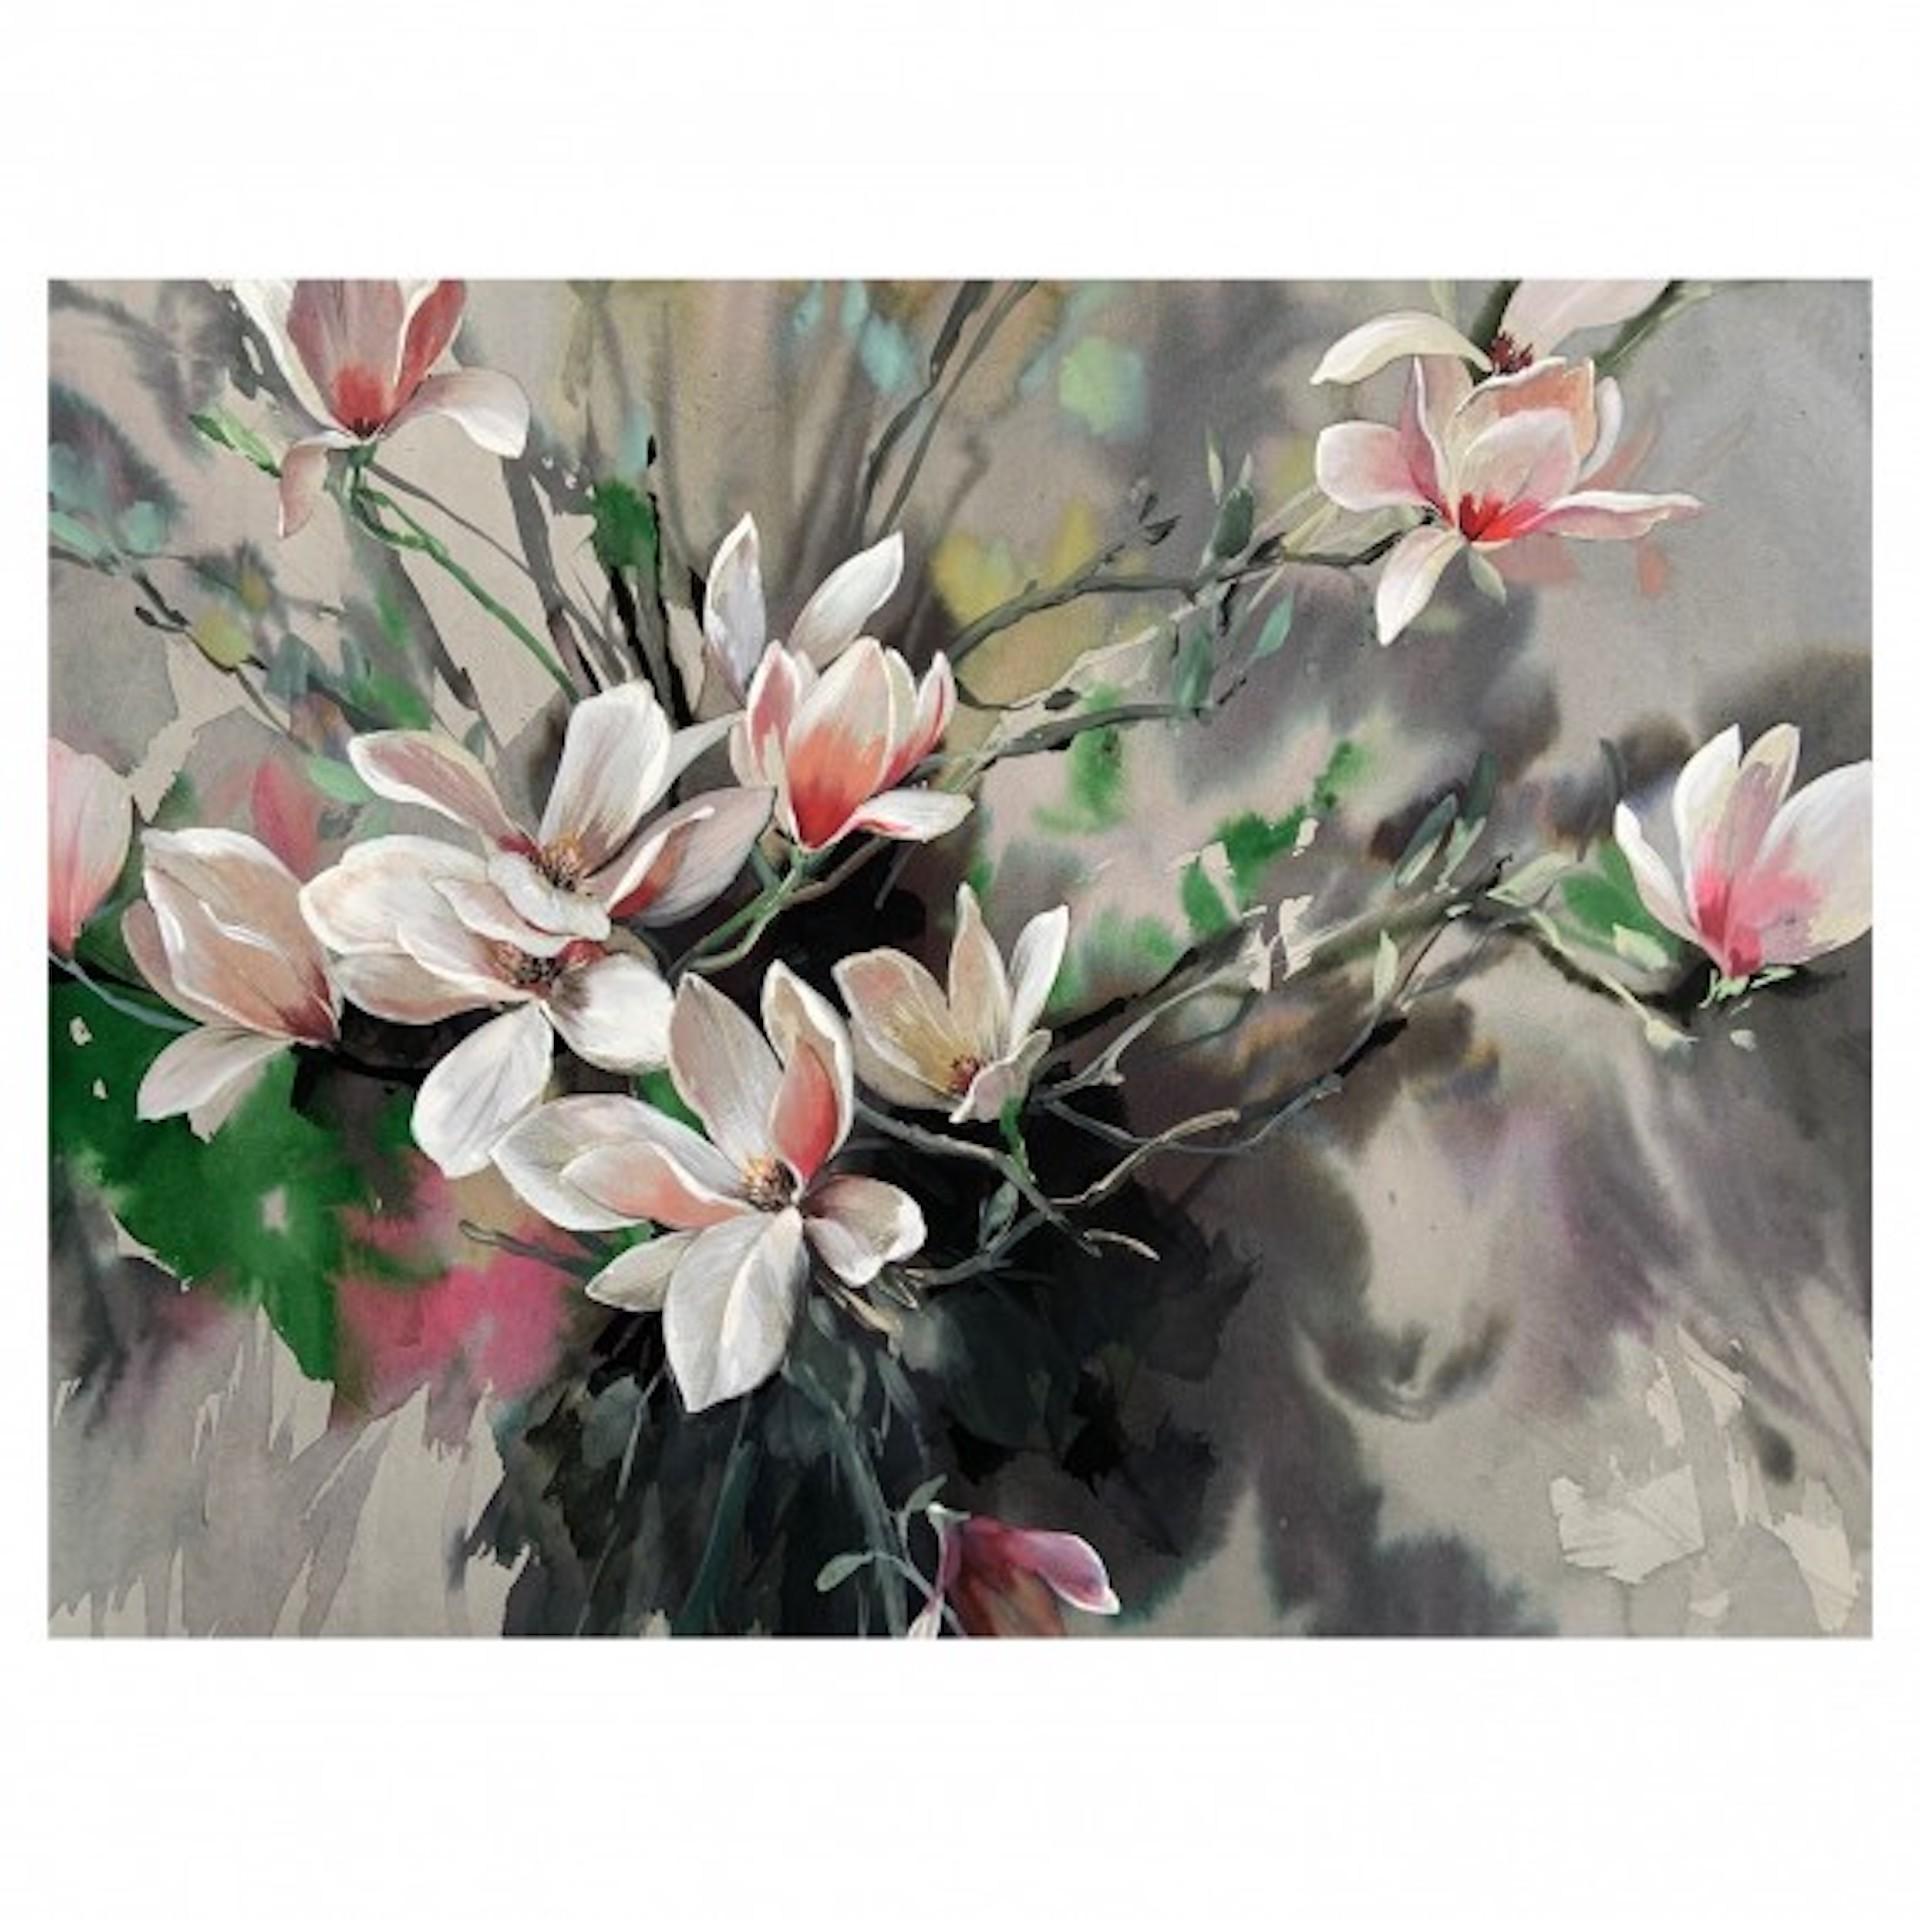 Jo Haran
Perched Magnolia
Original Floral Painting
Watercolour, Gouache and Gesso on paper
Image Size: H 46.5cm x W 61.5cm 
Sheet/Canvas Size: H 49.5cm x W 64cm 
Sold Unframed
Free Shipping
Please note that in situ images are purely an indication of